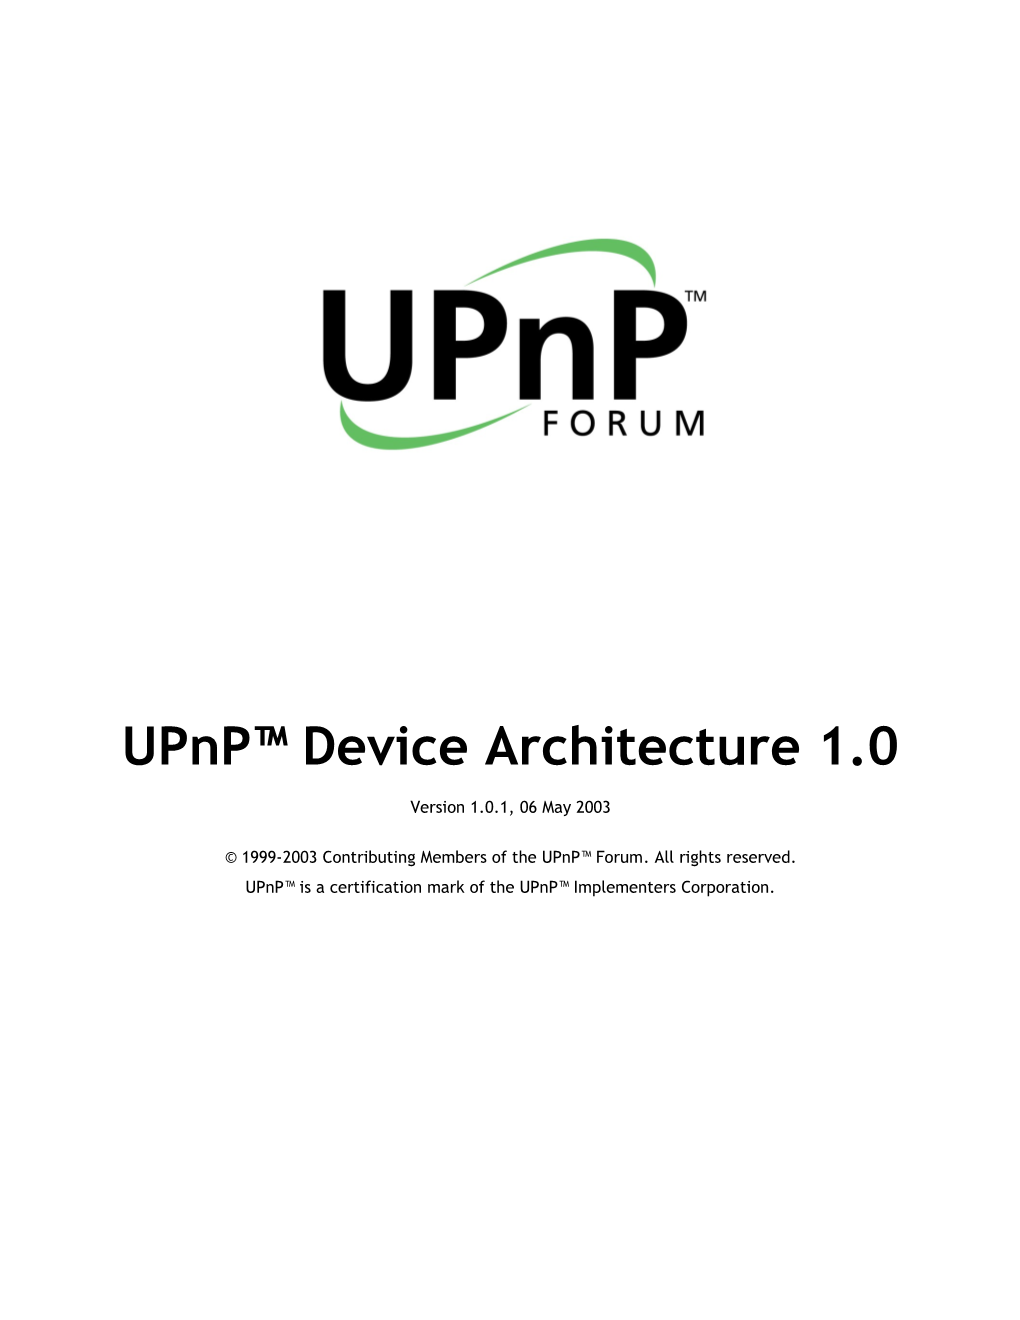 Universal Plug and Play Device Architecture